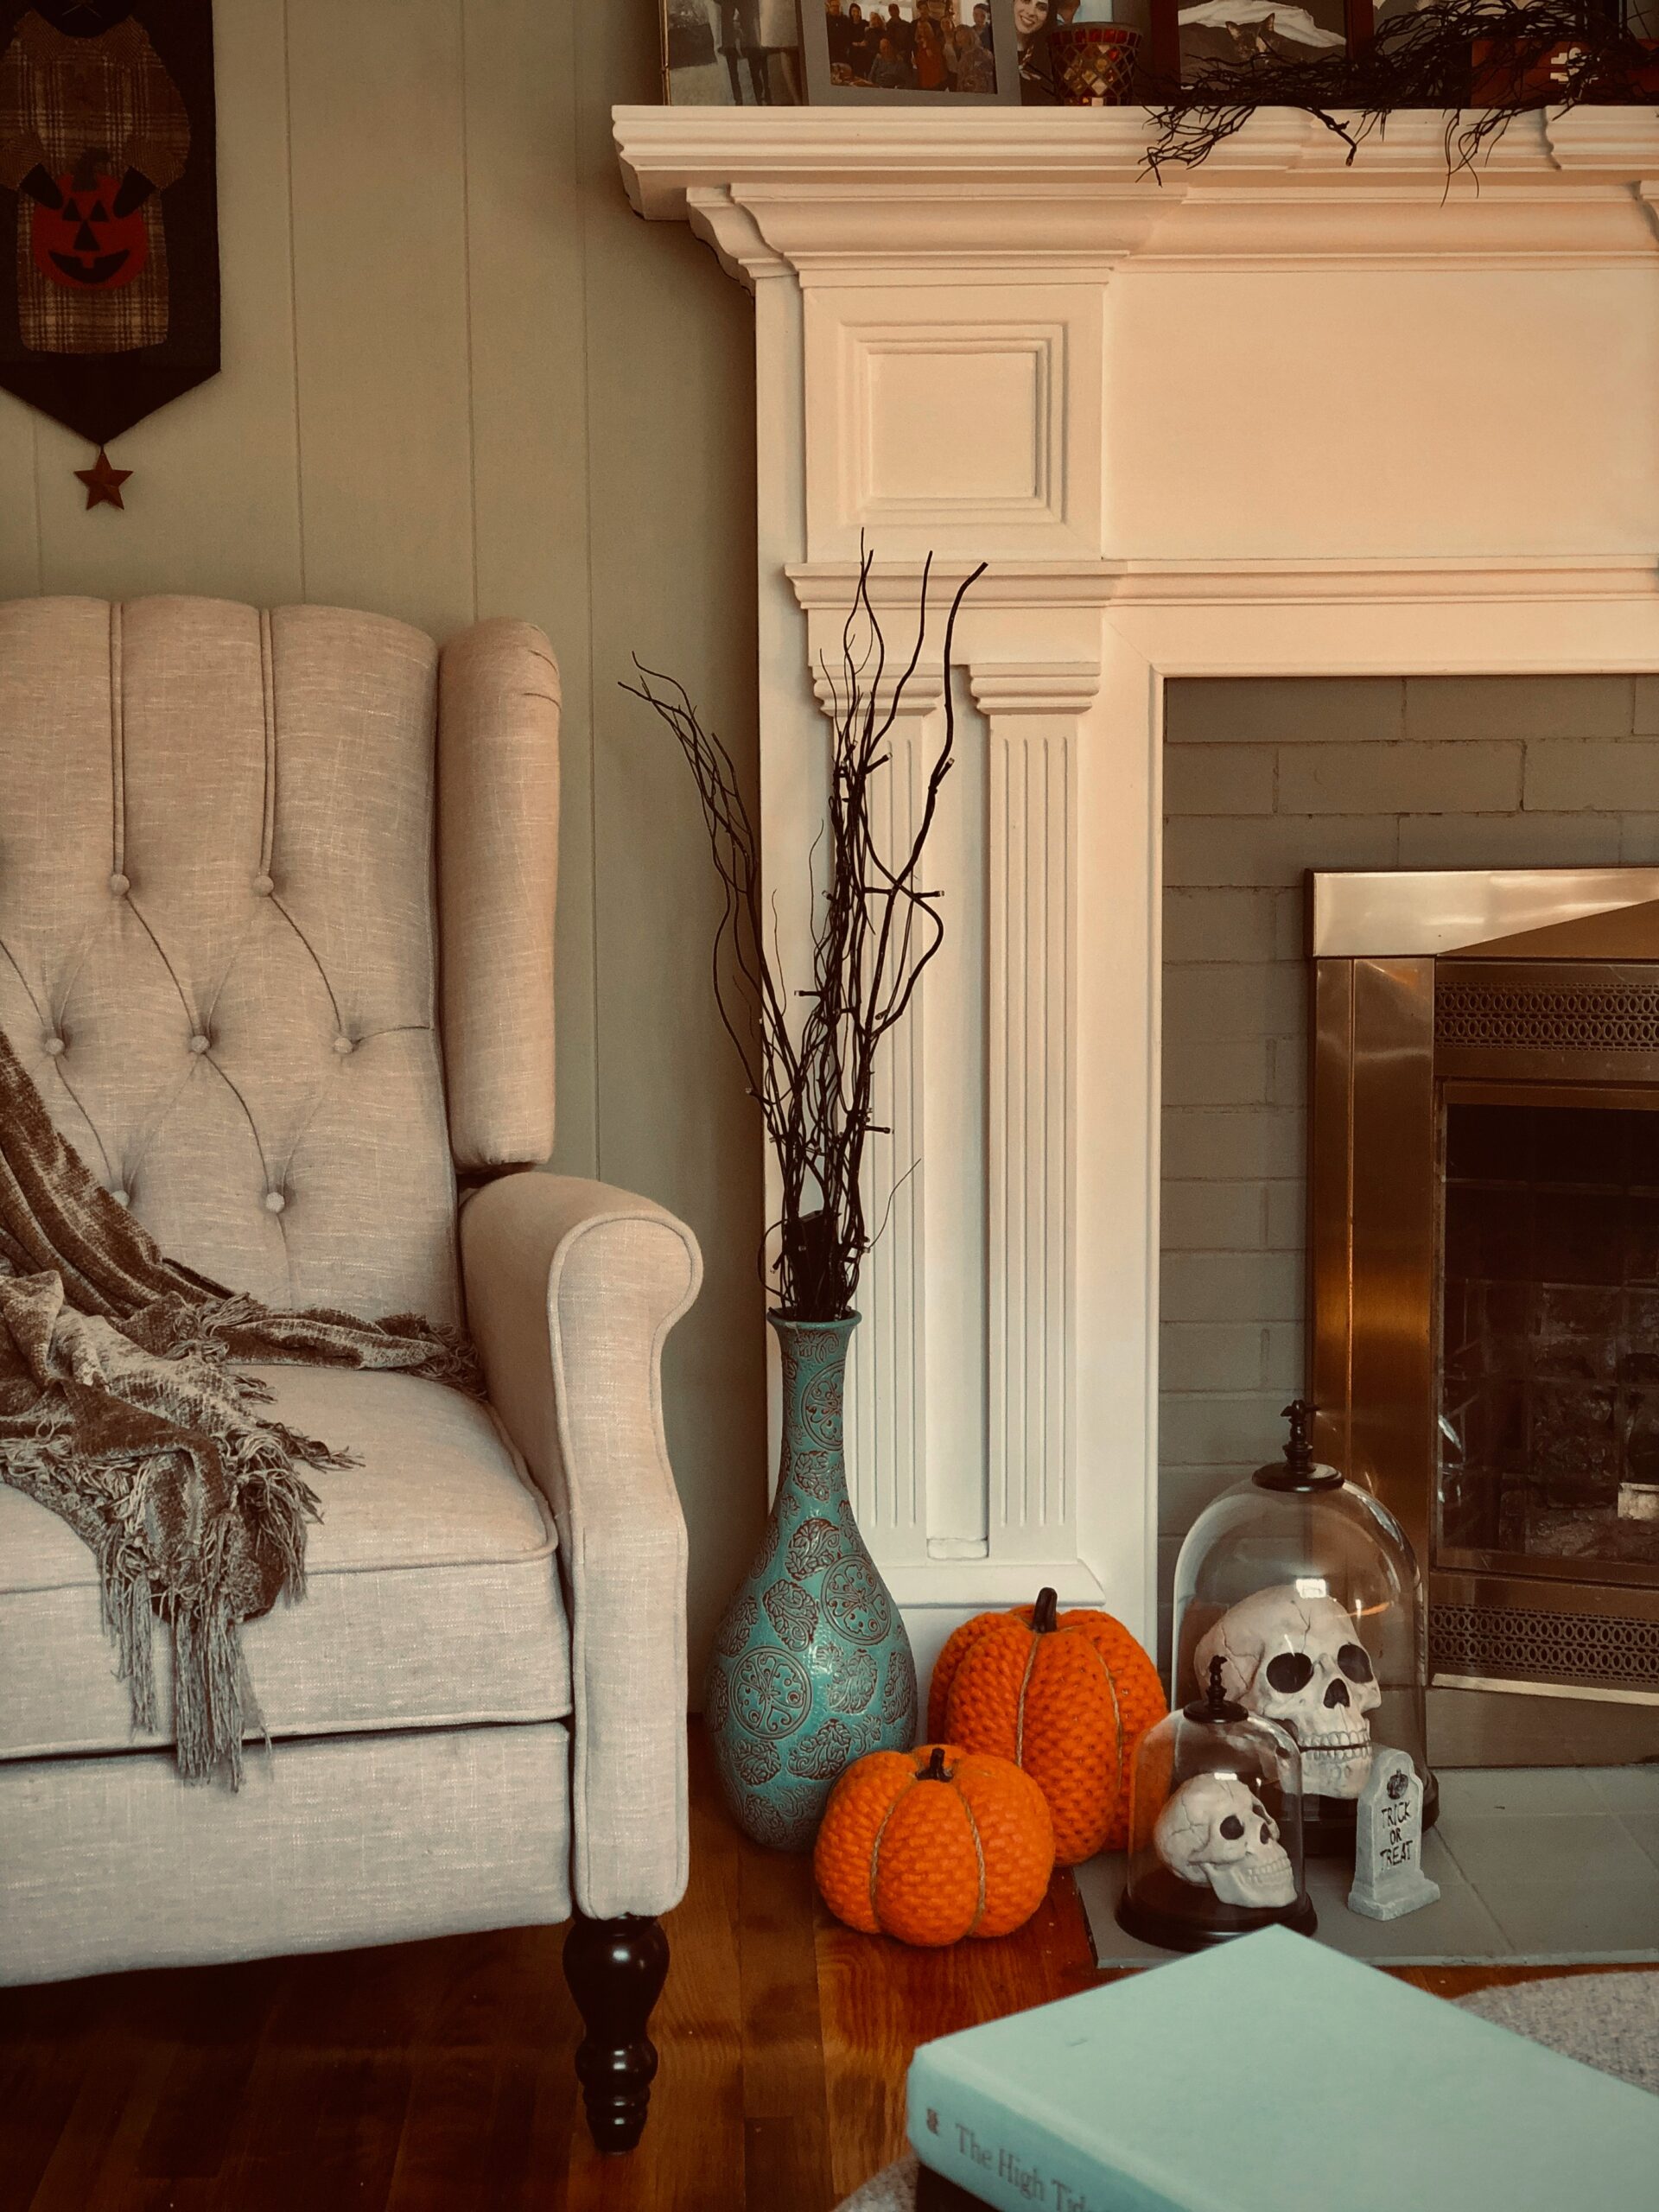 Spice Up Your Halloween with Crate and Barrel’s Spooky Glassware Collection